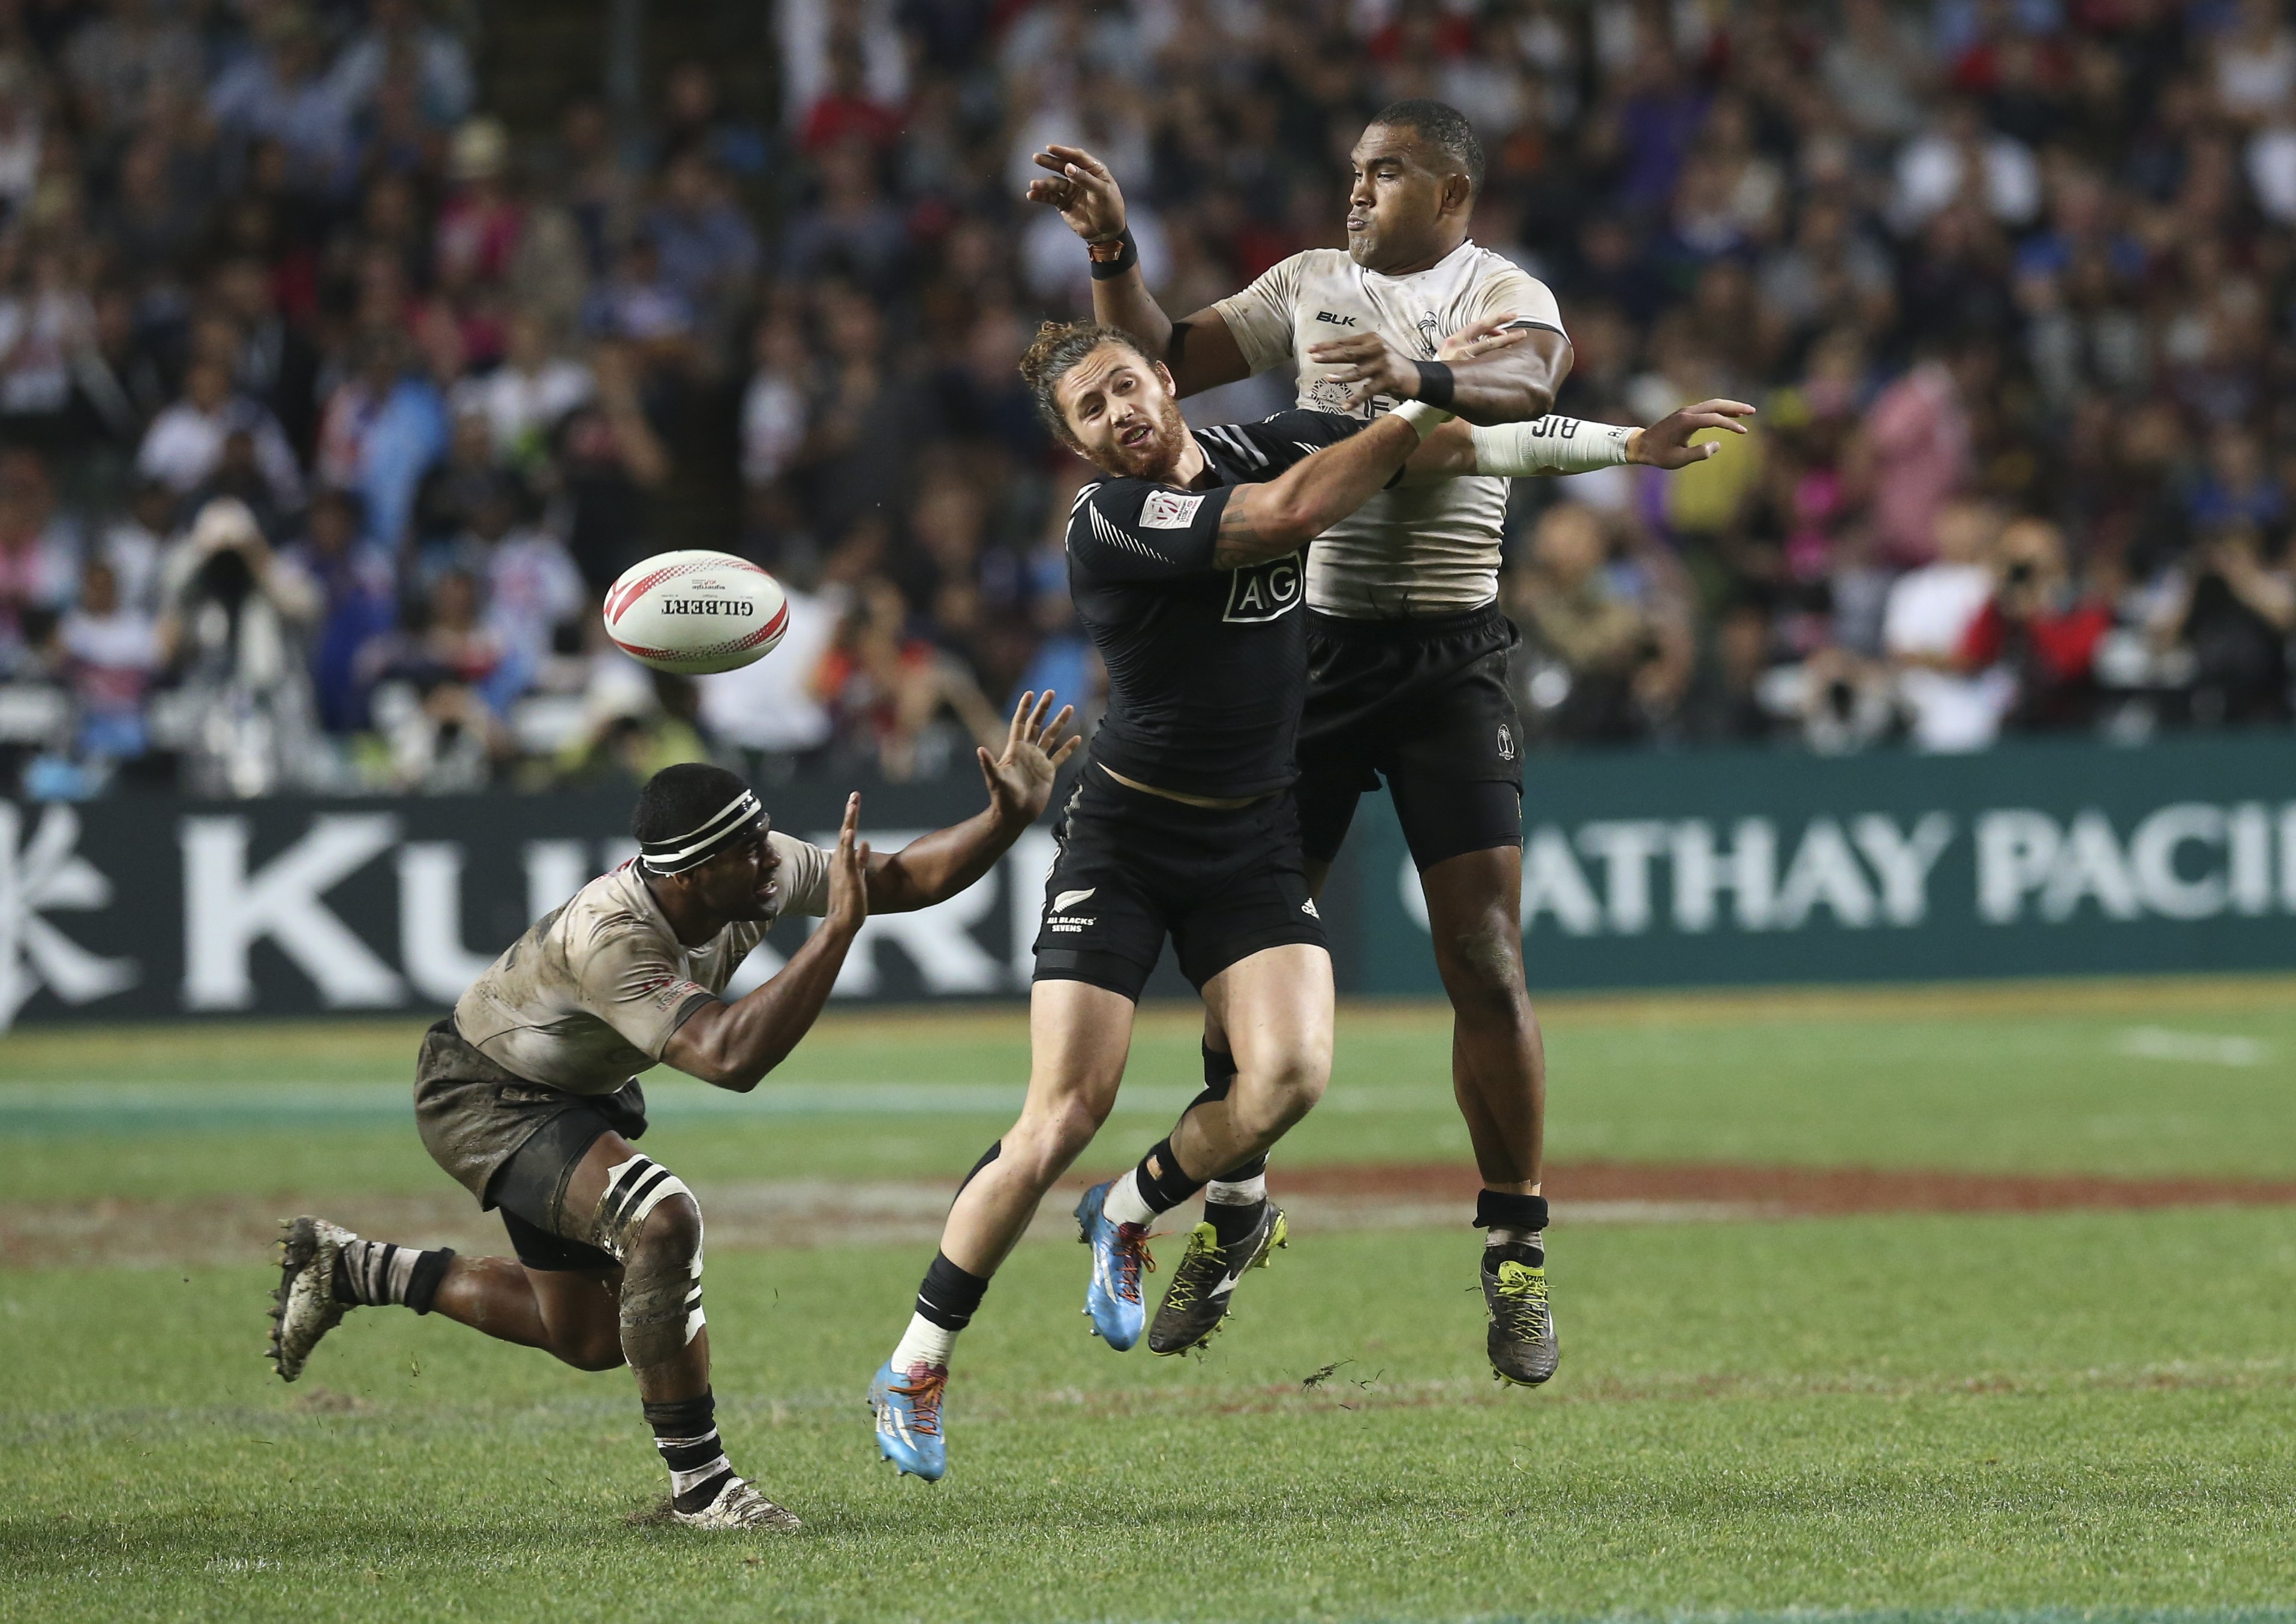 Isake Katonibau (right) makes his presence felt against New Zealand in the final of the 2016 Cathay Pacific/HSBC Hong Kong Sevens. Fiji won 21-7, their fourth victory in a row. Photo: K. Y. Cheng